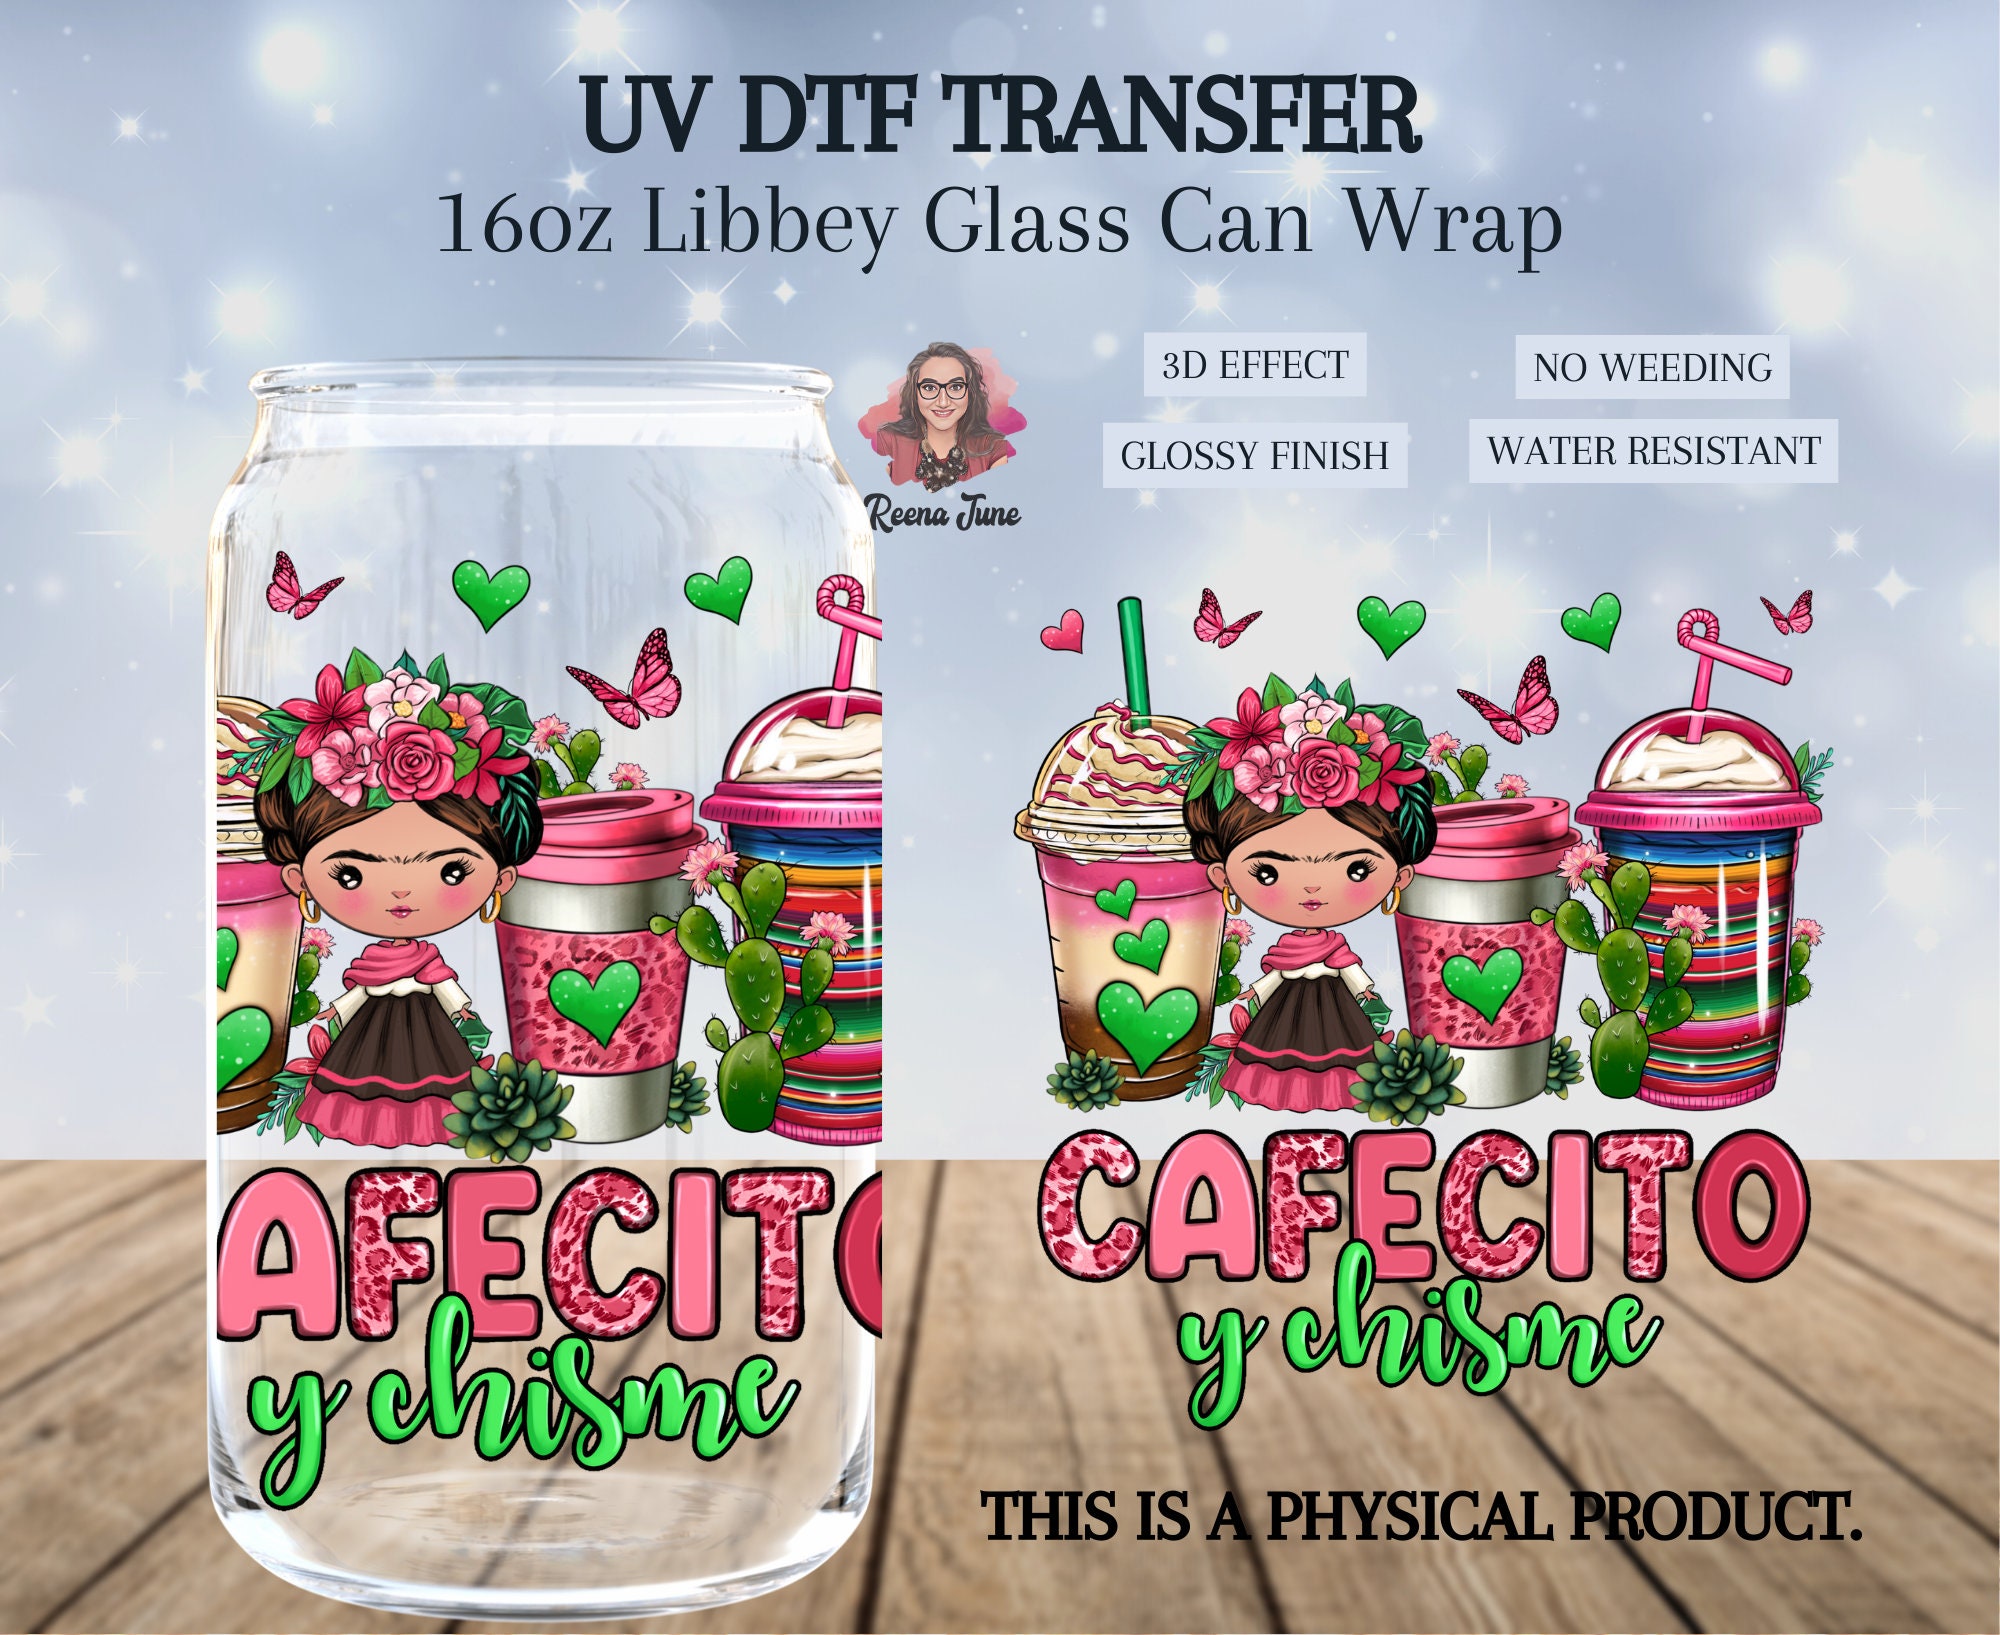 She is UV DTF Wrap 